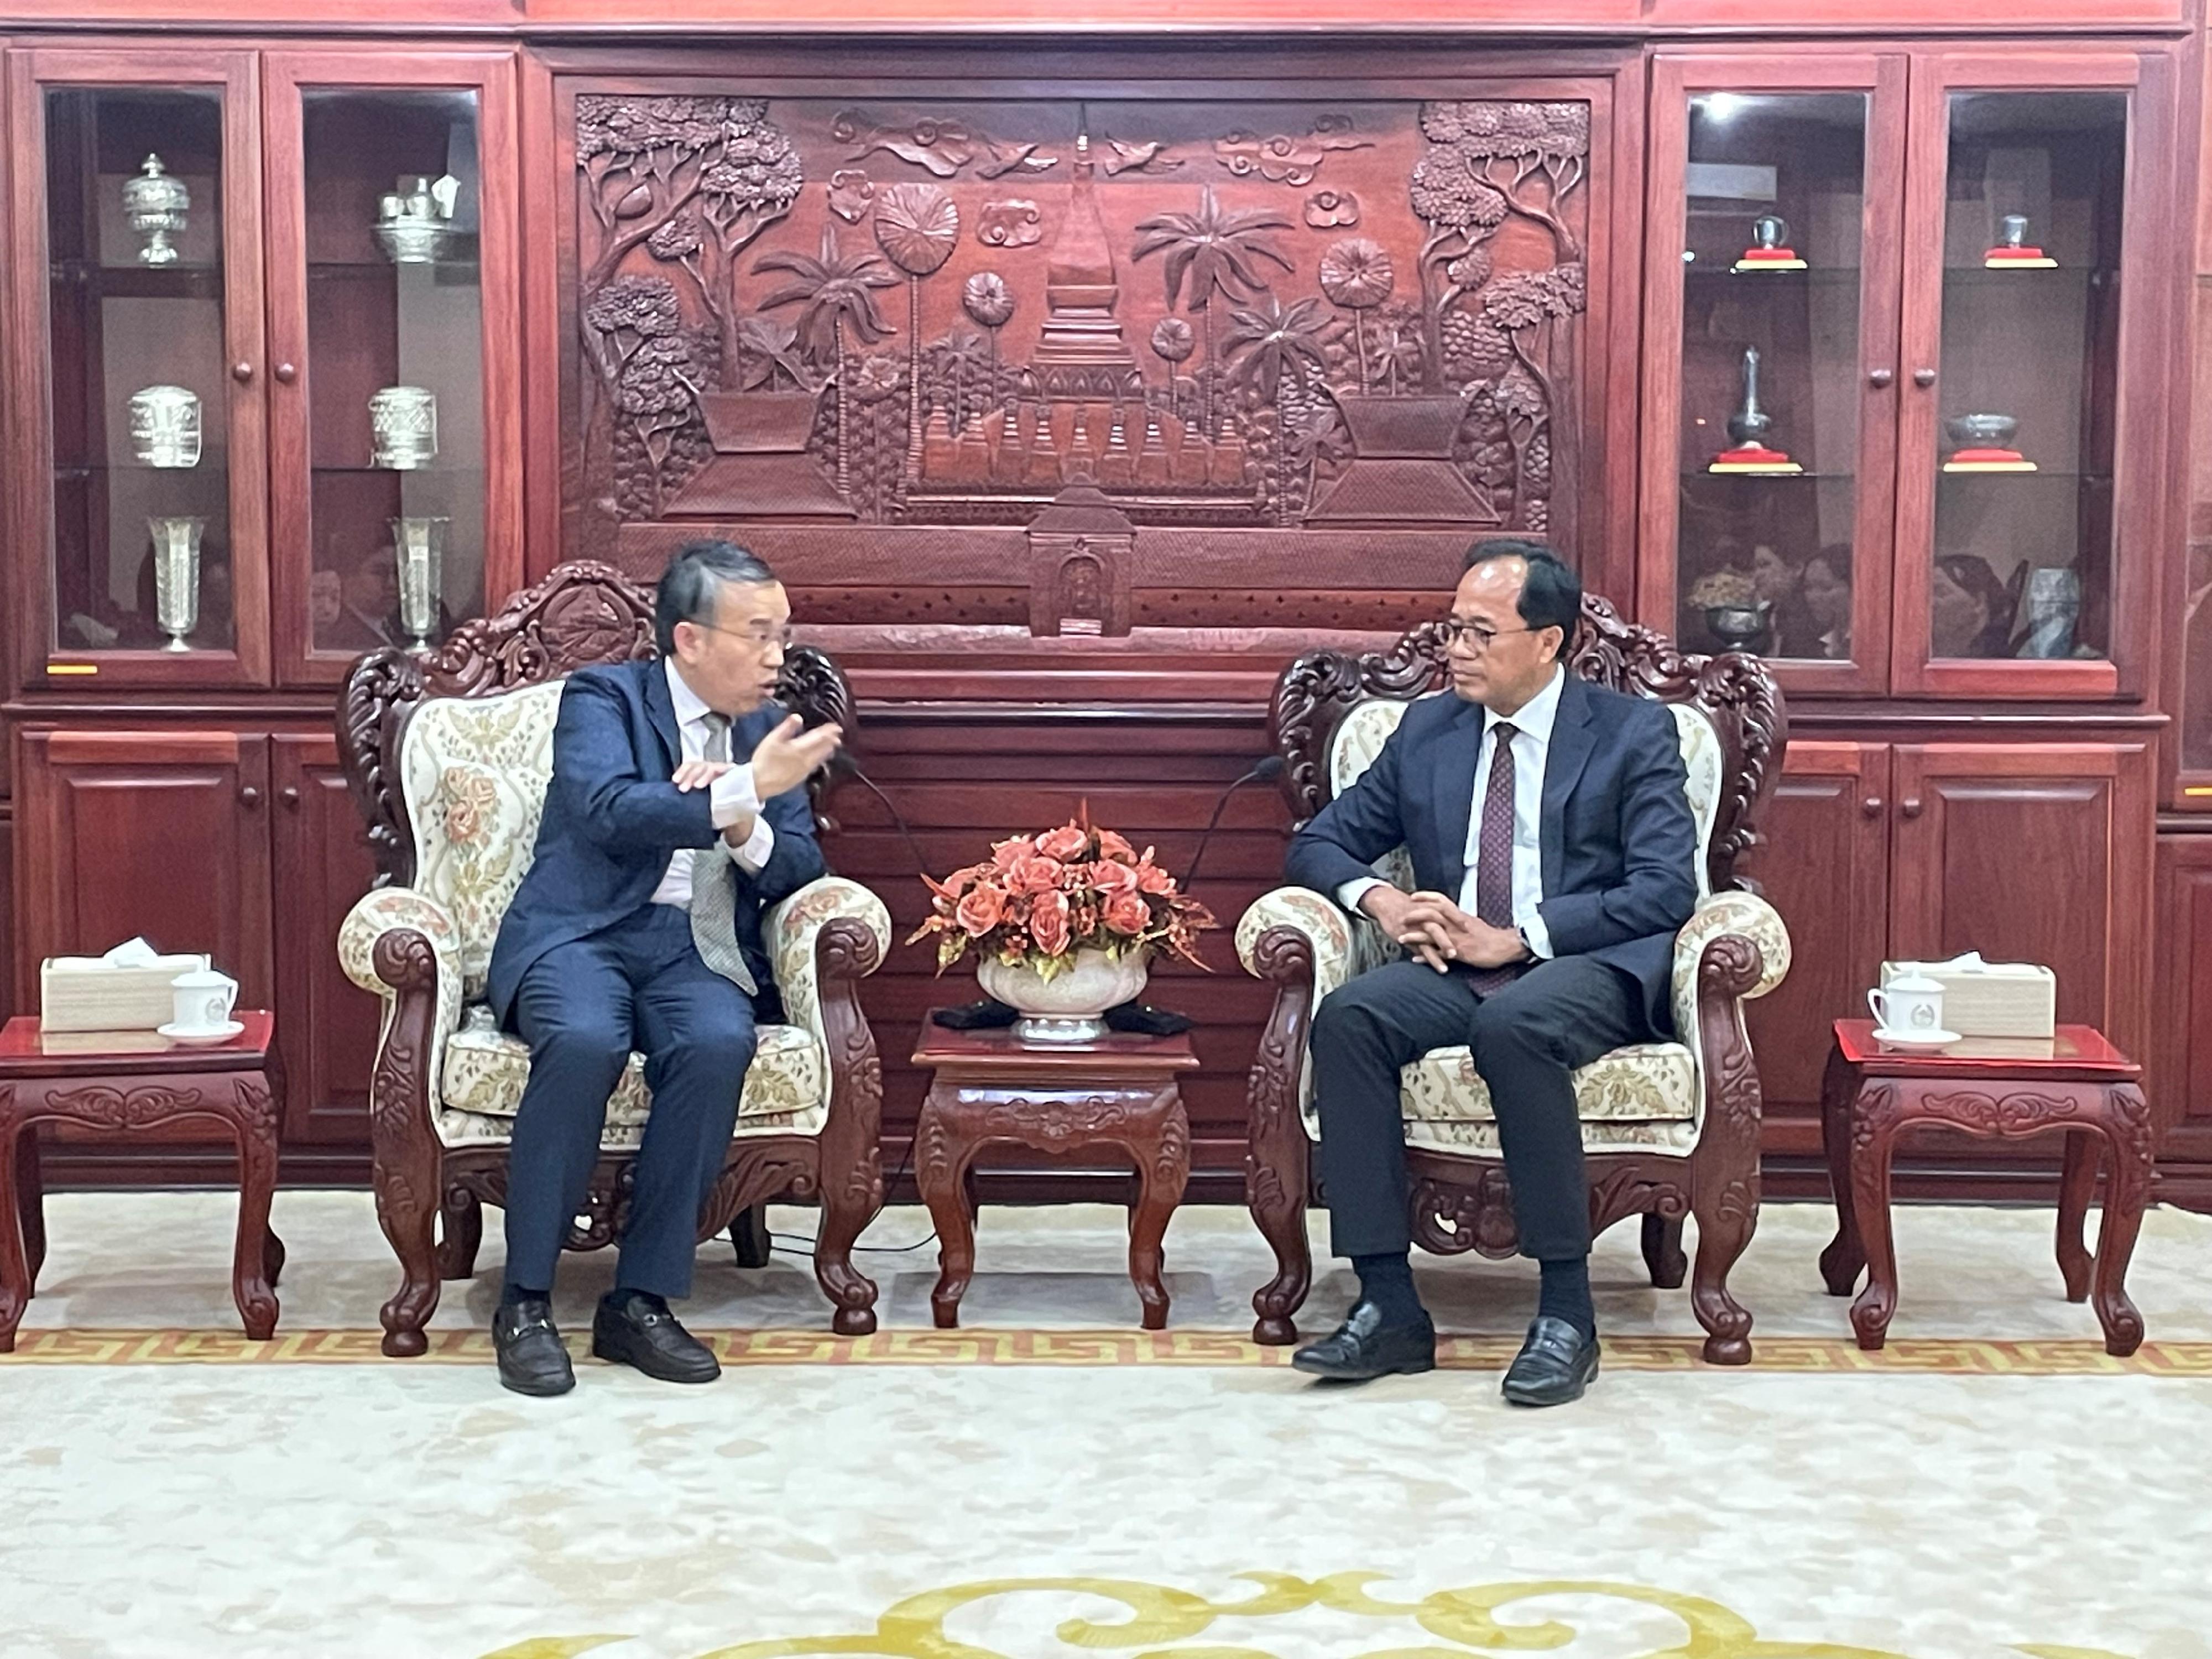 The Secretary for Financial Services and the Treasury, Mr Christopher Hui (left), meets with the Governor of the Bank of the Lao PDR (the central bank of the country), Dr Bounleua Sinxayvoravong (right), in Vientiane, Laos today (December 11) to exchange views on how to ensure resilience of the financial system and the sound supervision of financial institutions.